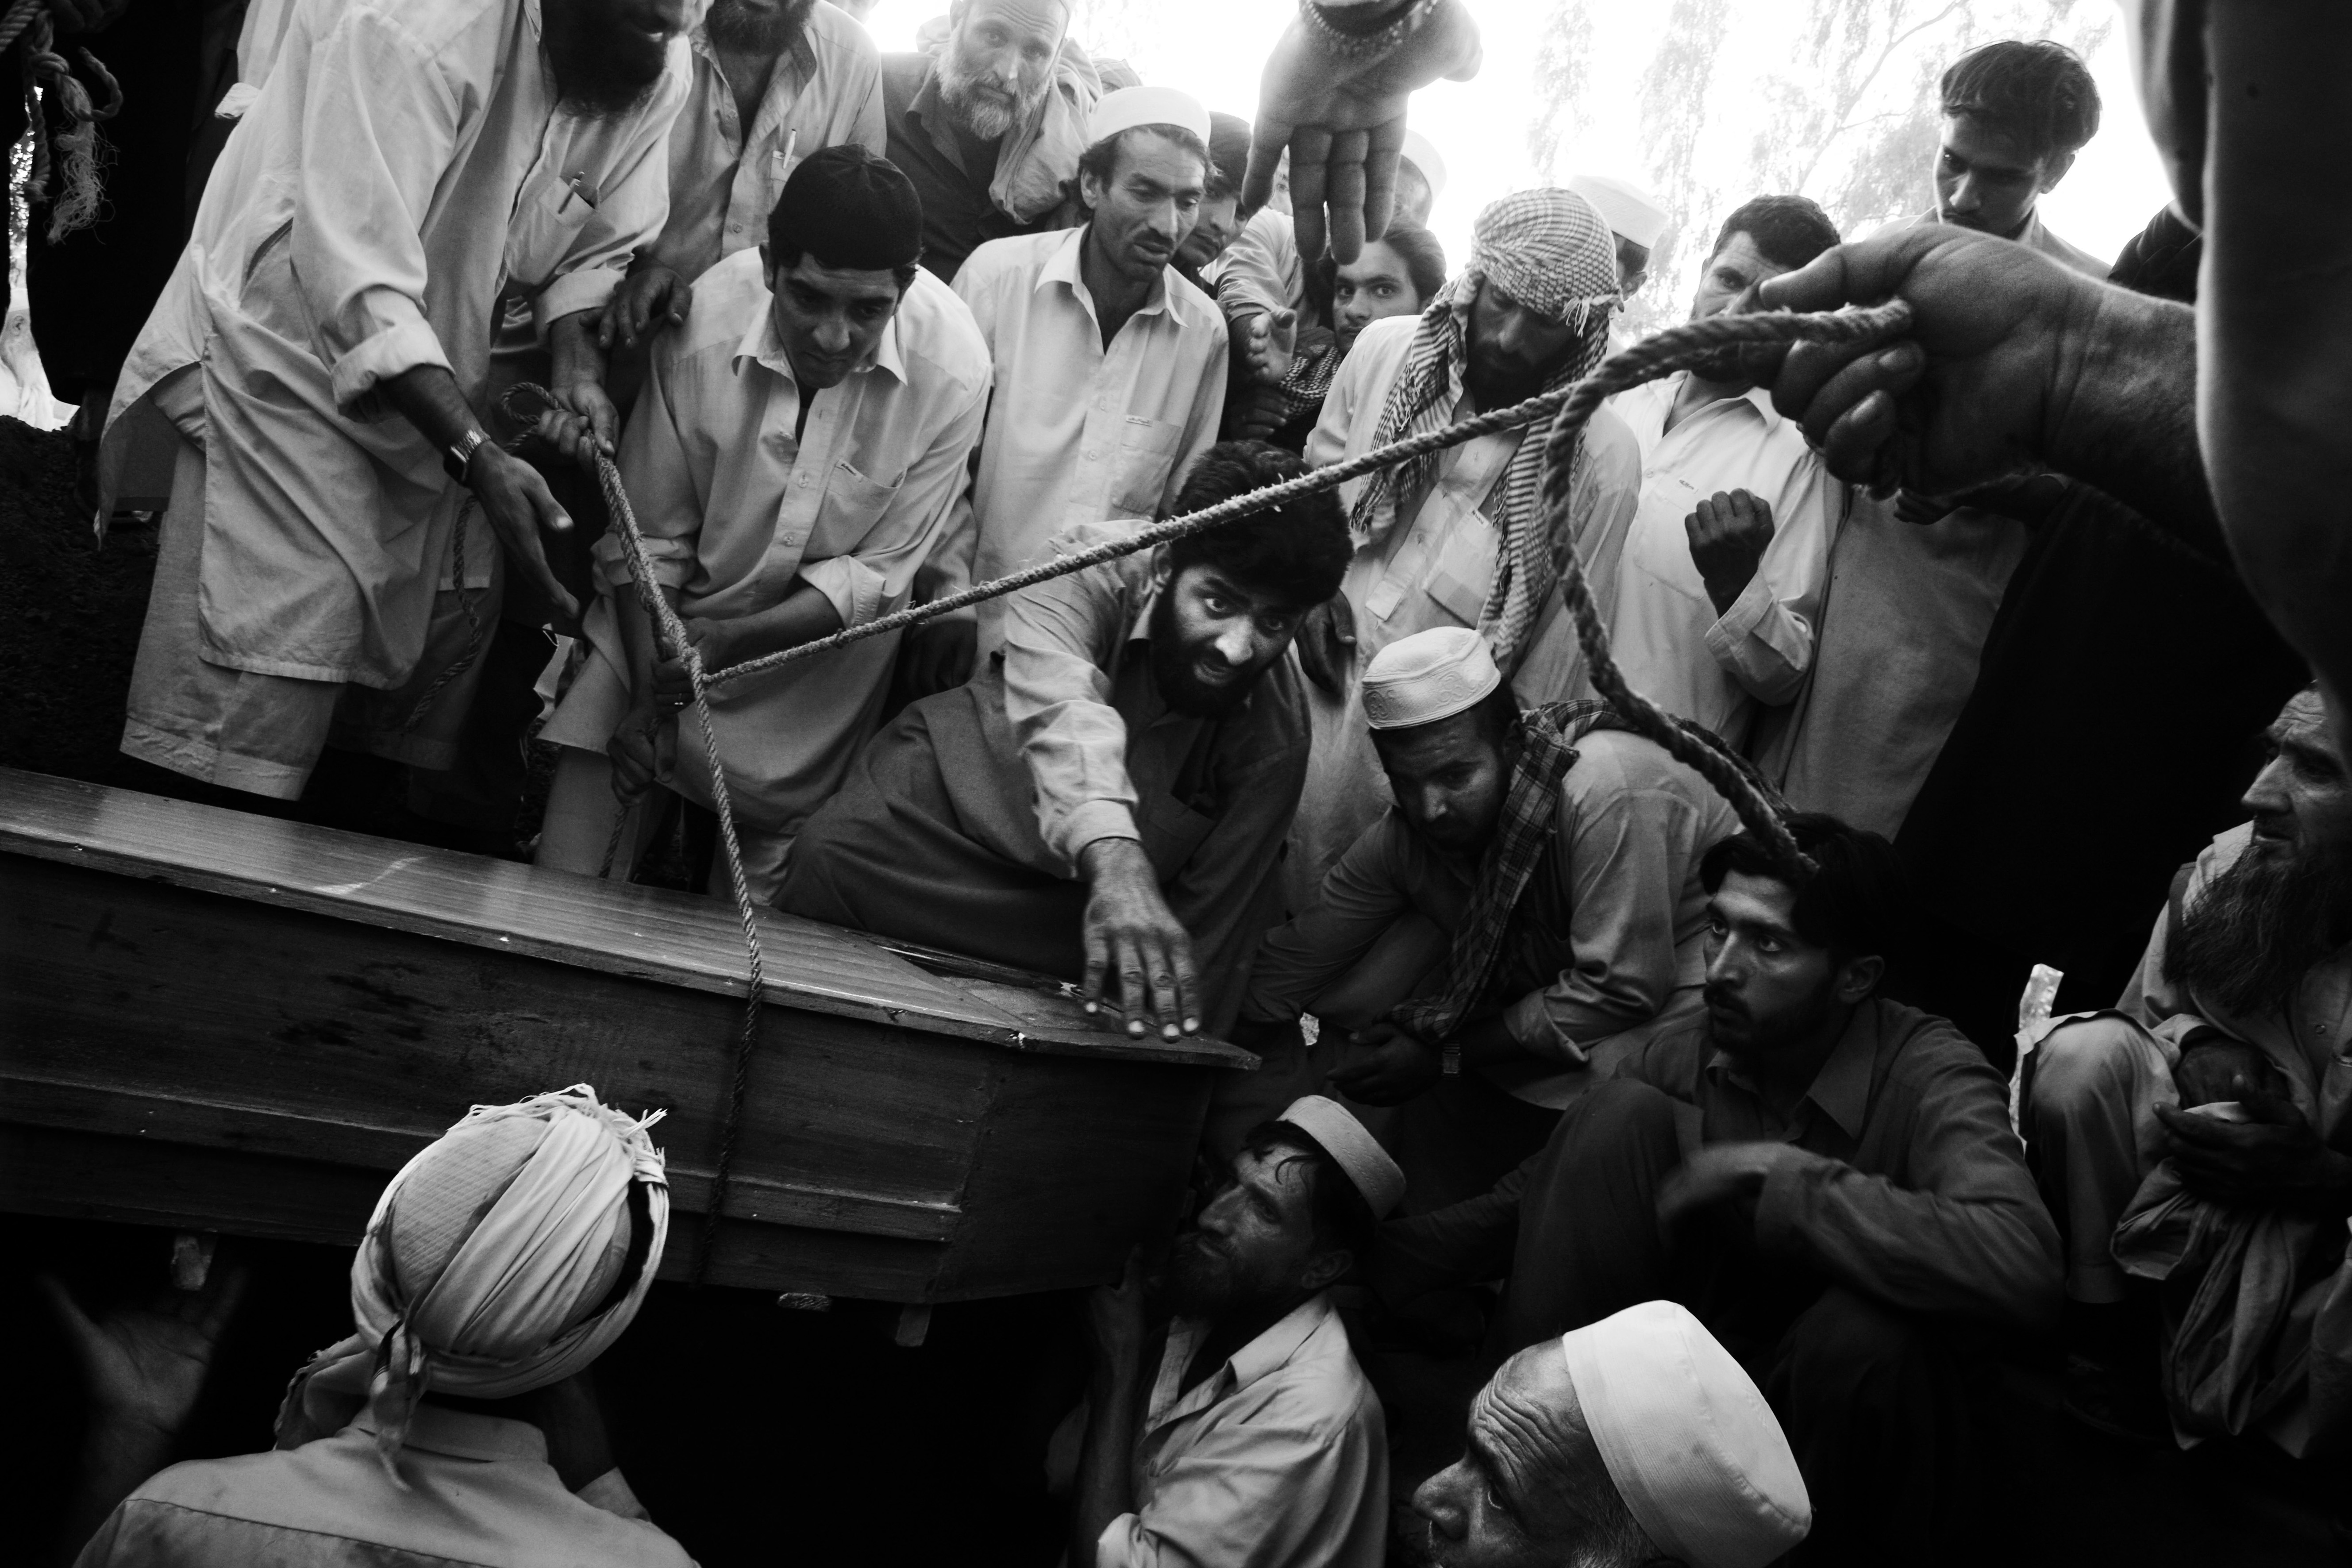 A funeral for a man killed in a suicide blast in an open market in Peshawar. June 2009.